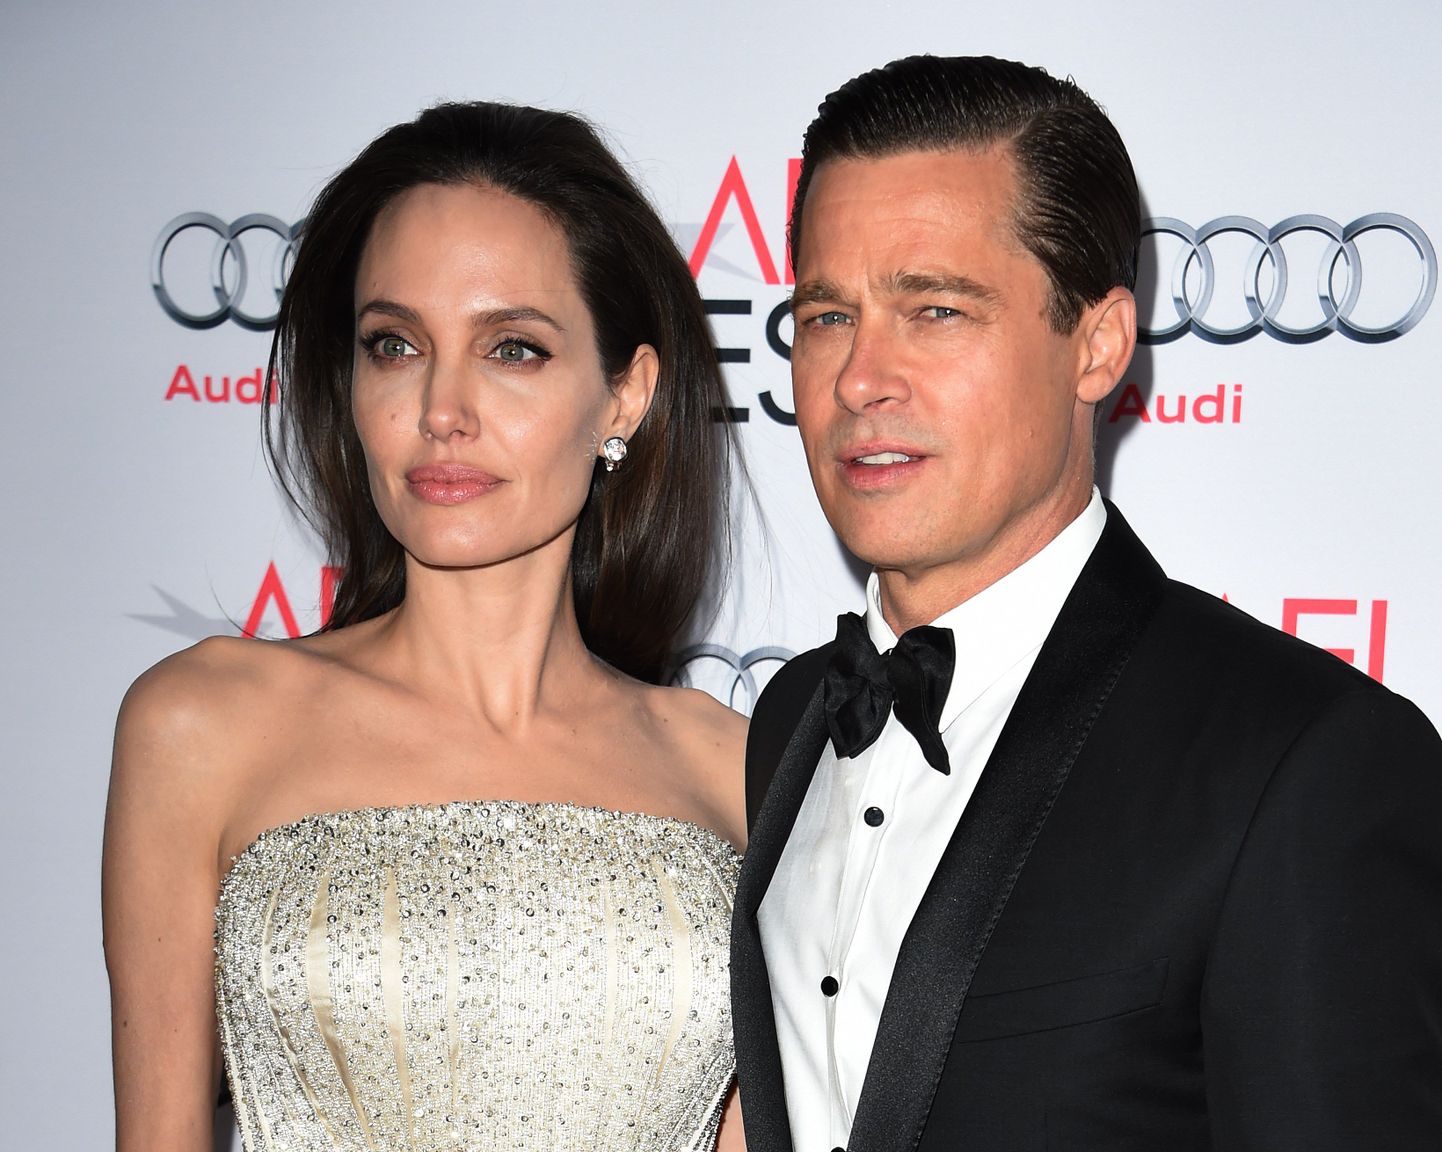 Writer-director-producer-actress Angelina Jolie Pitt (L) and actor-producer Brad Pitt arrive for the opening night gala premiere of Universal Pictures' 'By the Sea' during AFI FEST 2015 presented by Audi at the TCL Chinese Theatre in Hollywood, California on November 5, 2015.         AFP PHOTO / MARK RALSTON